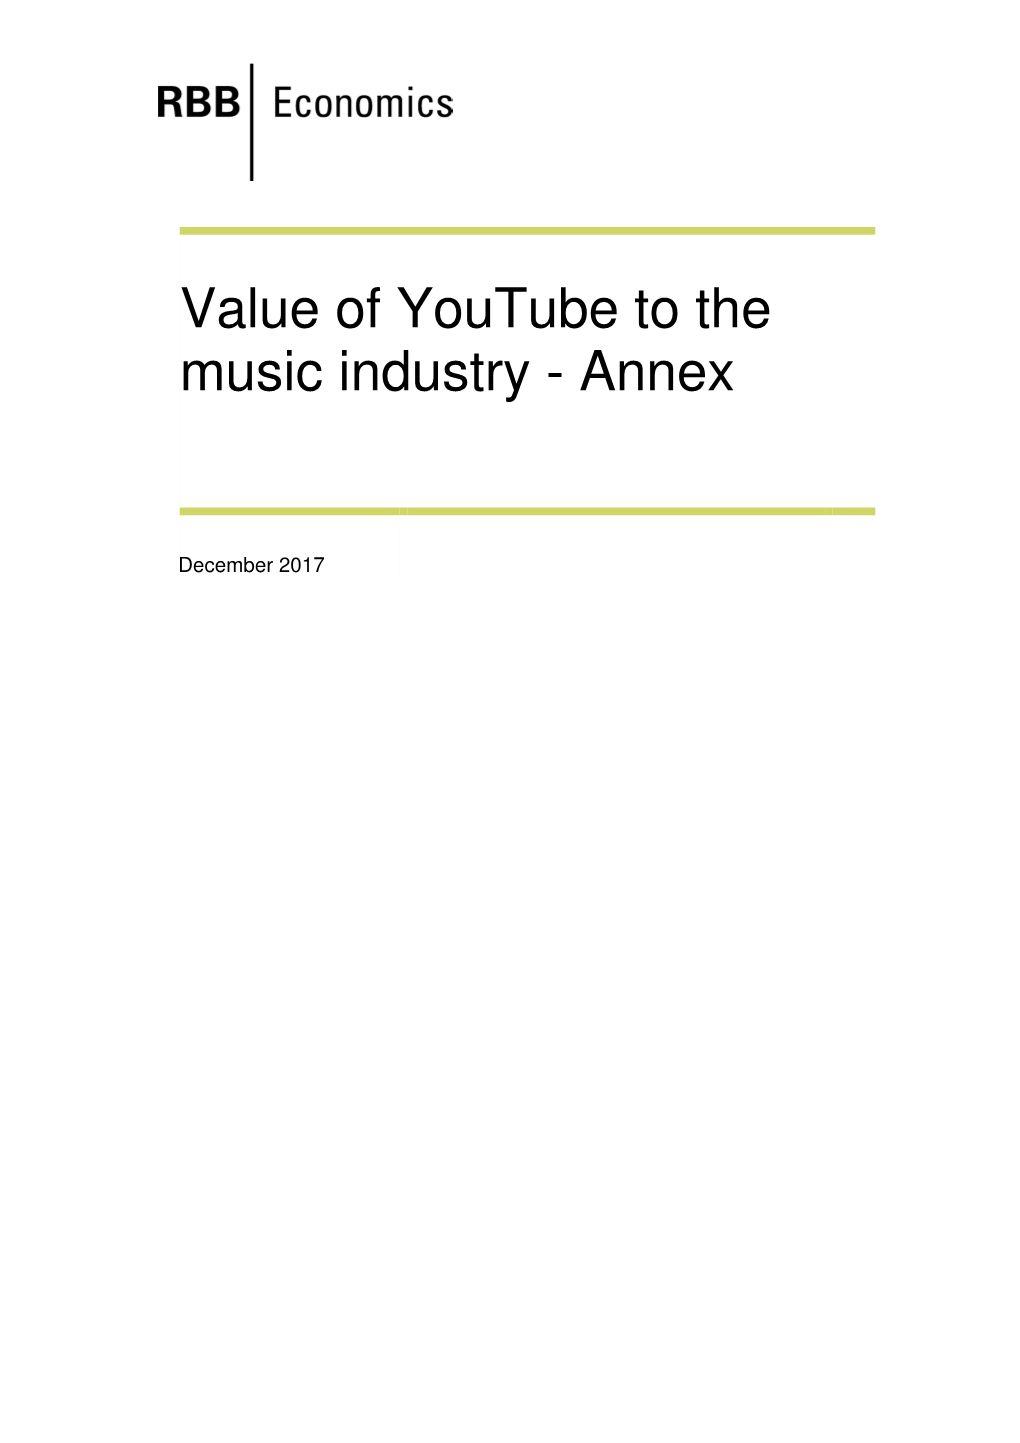 Value of Youtube to the Music Industry - Annex